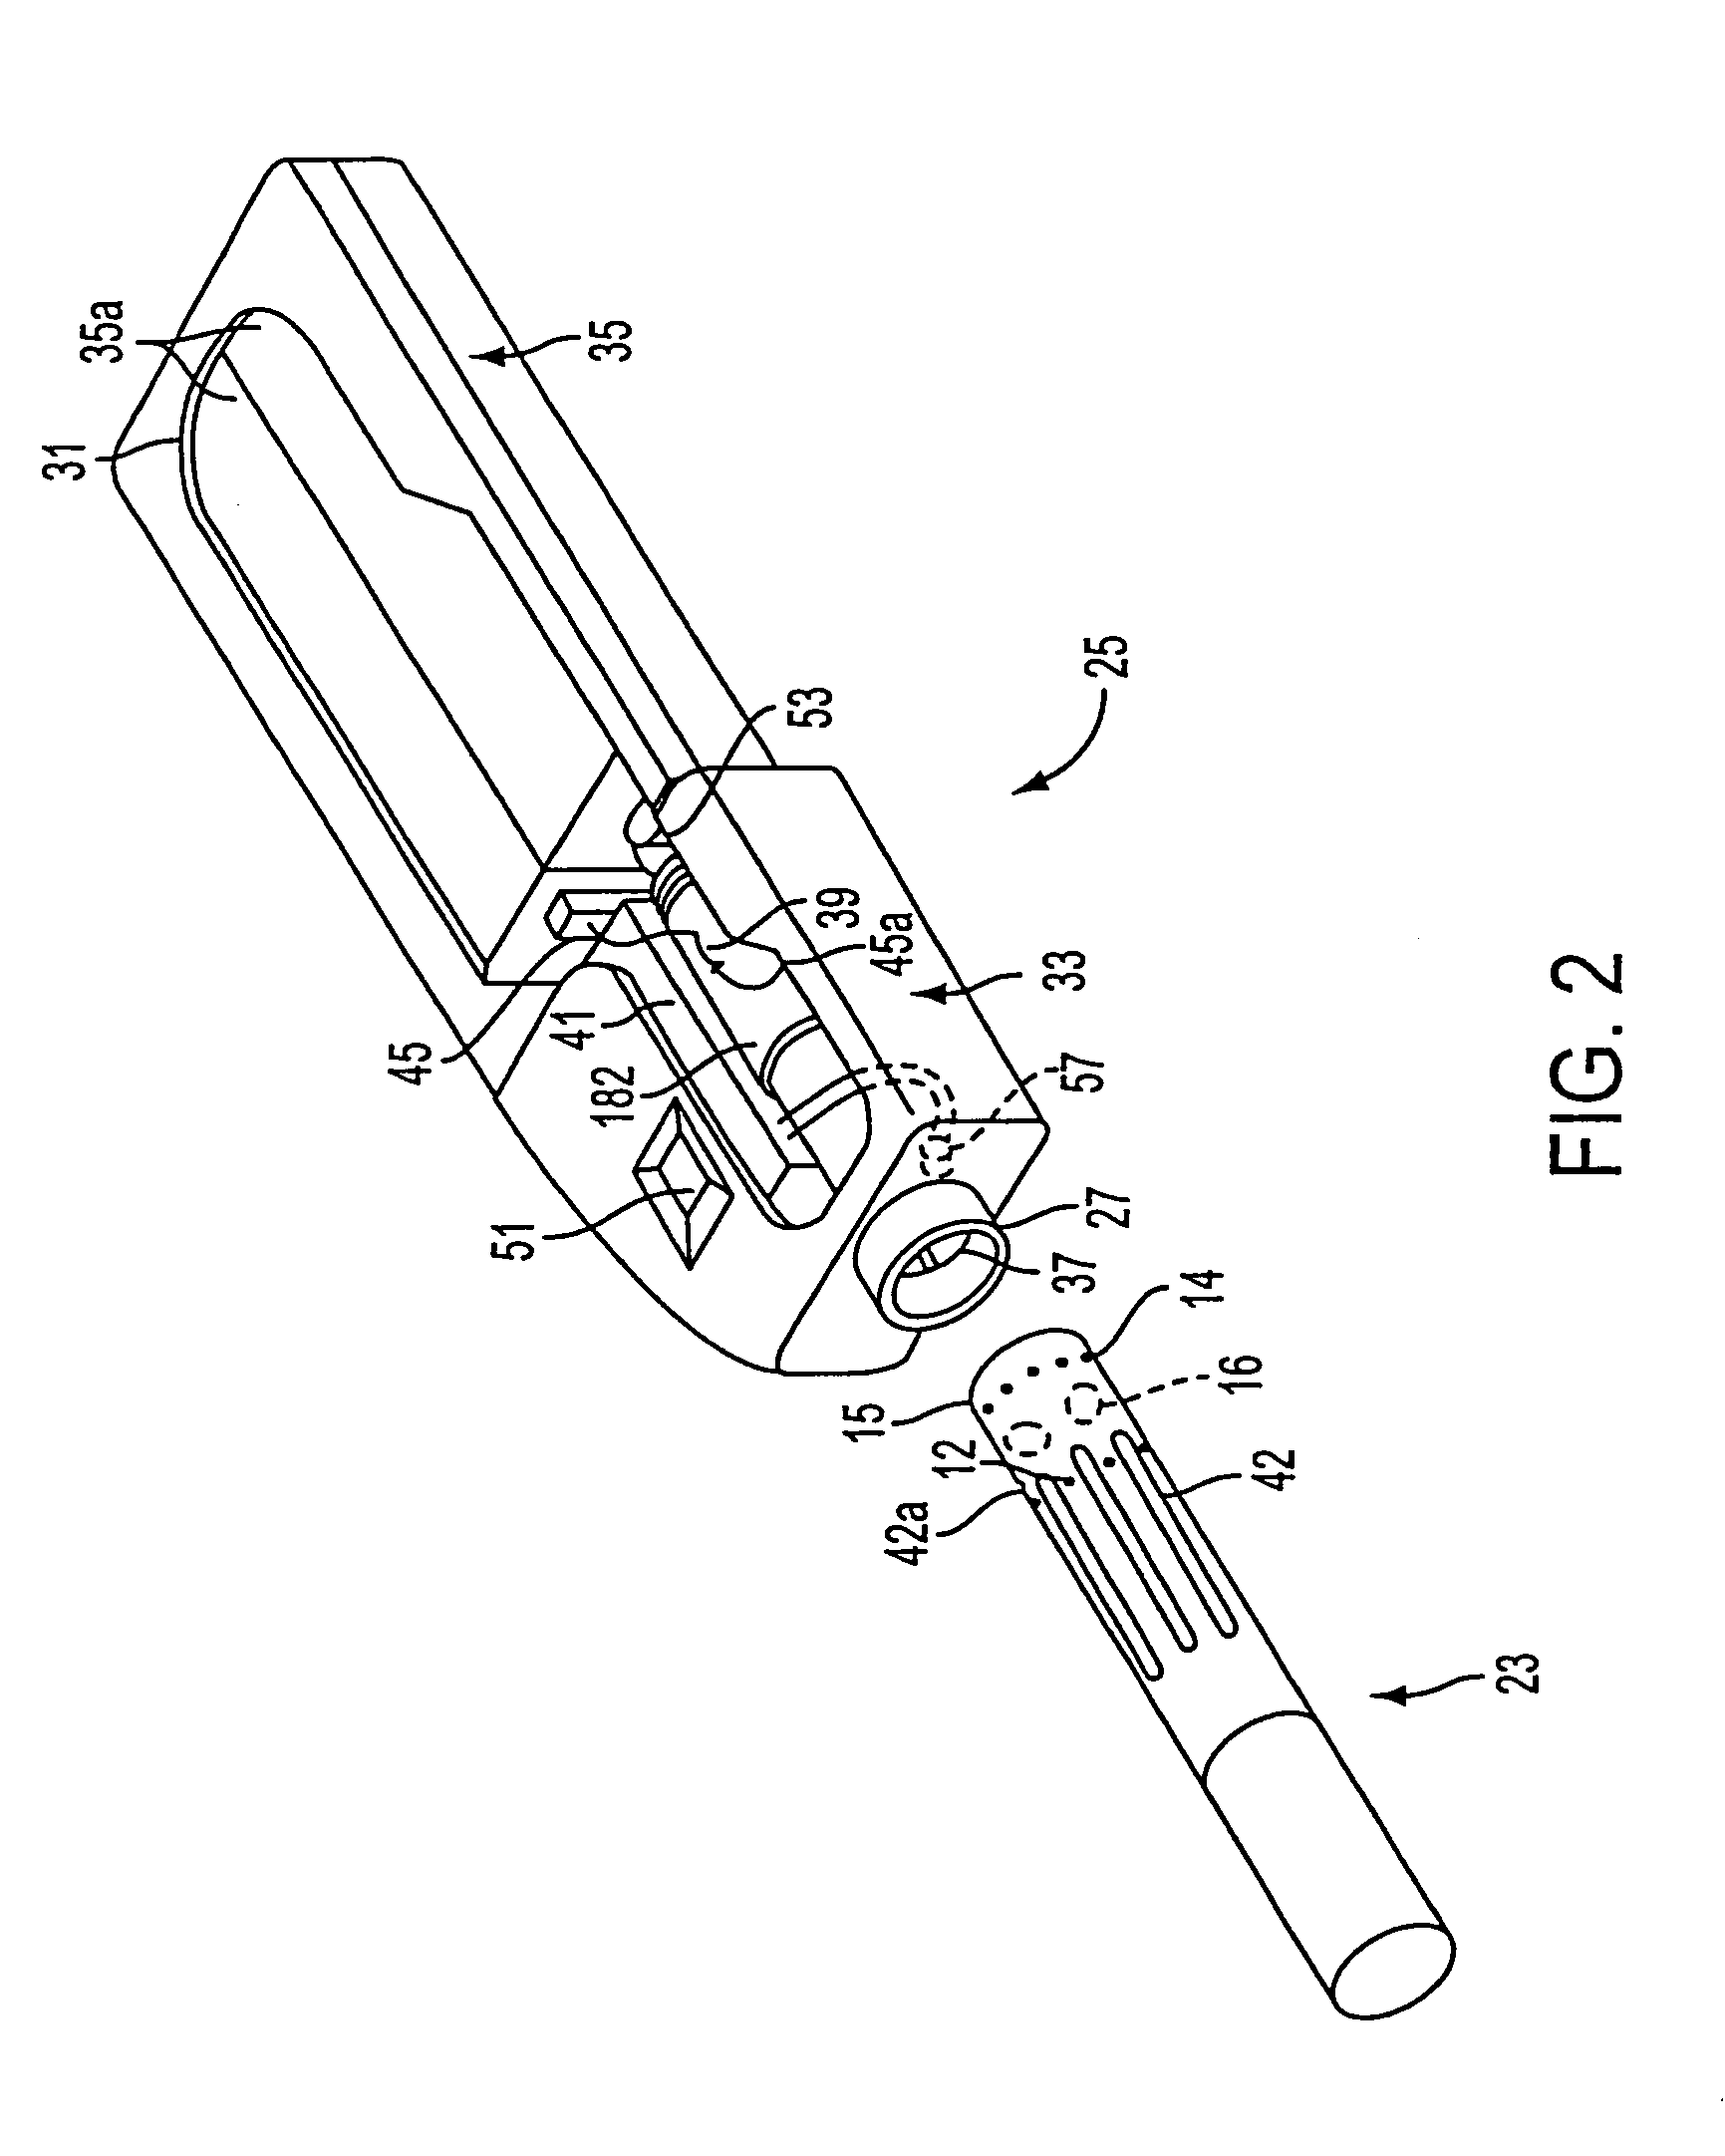 Electromagnetic mechanism for positioning heater blades of an electrically heated cigarette smoking system